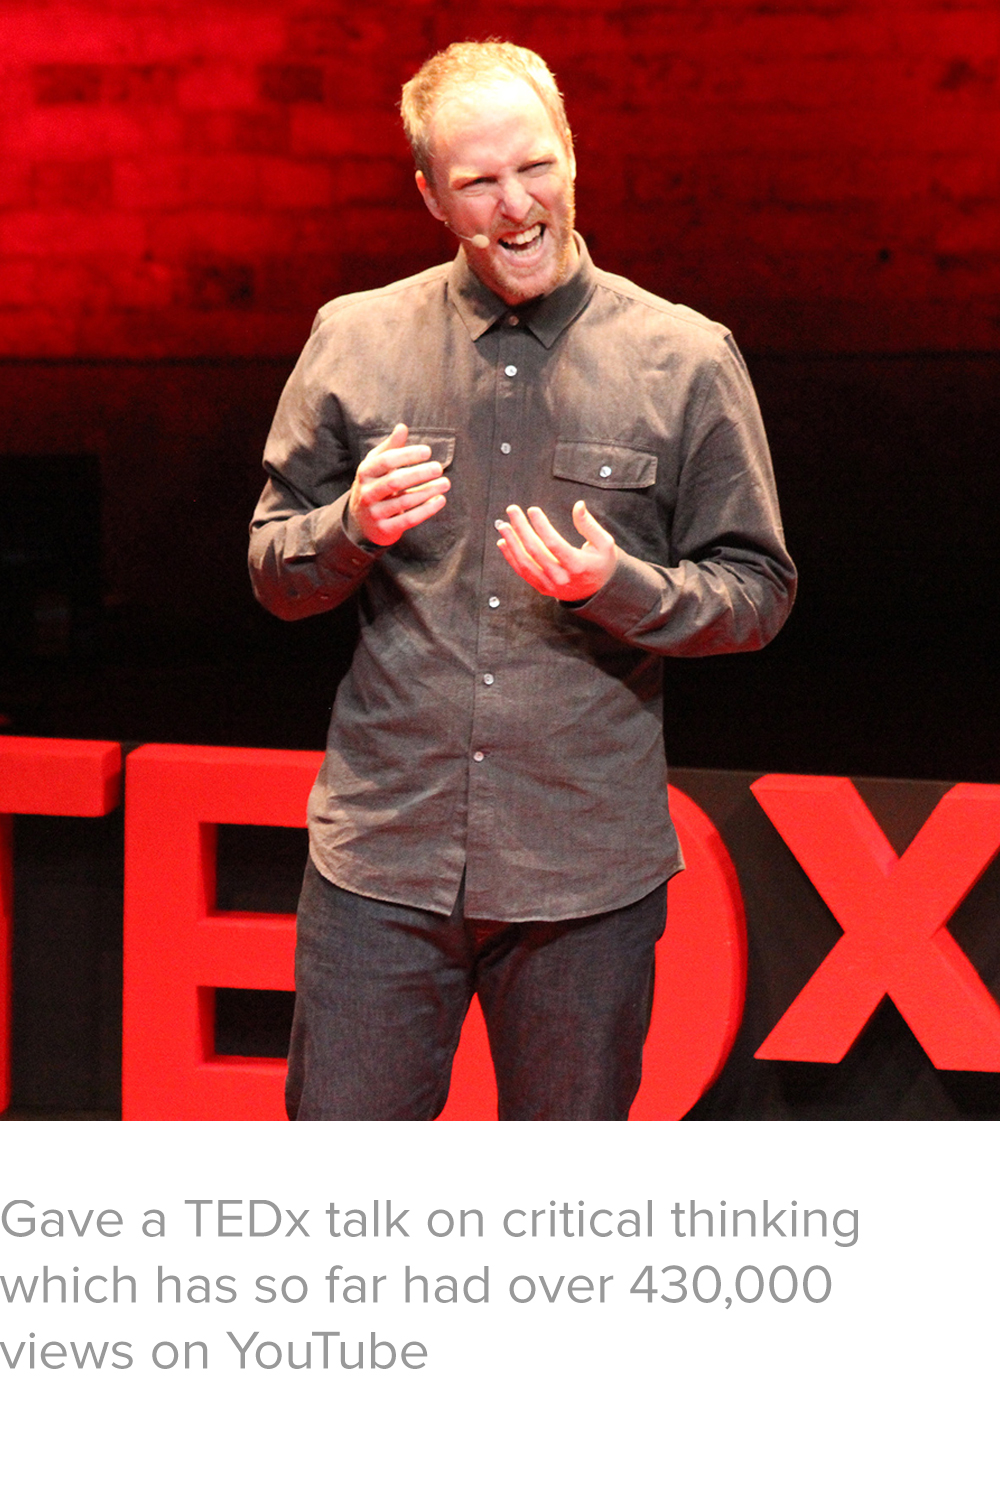 Other-Things-I-Did-V2_Tedx.jpg